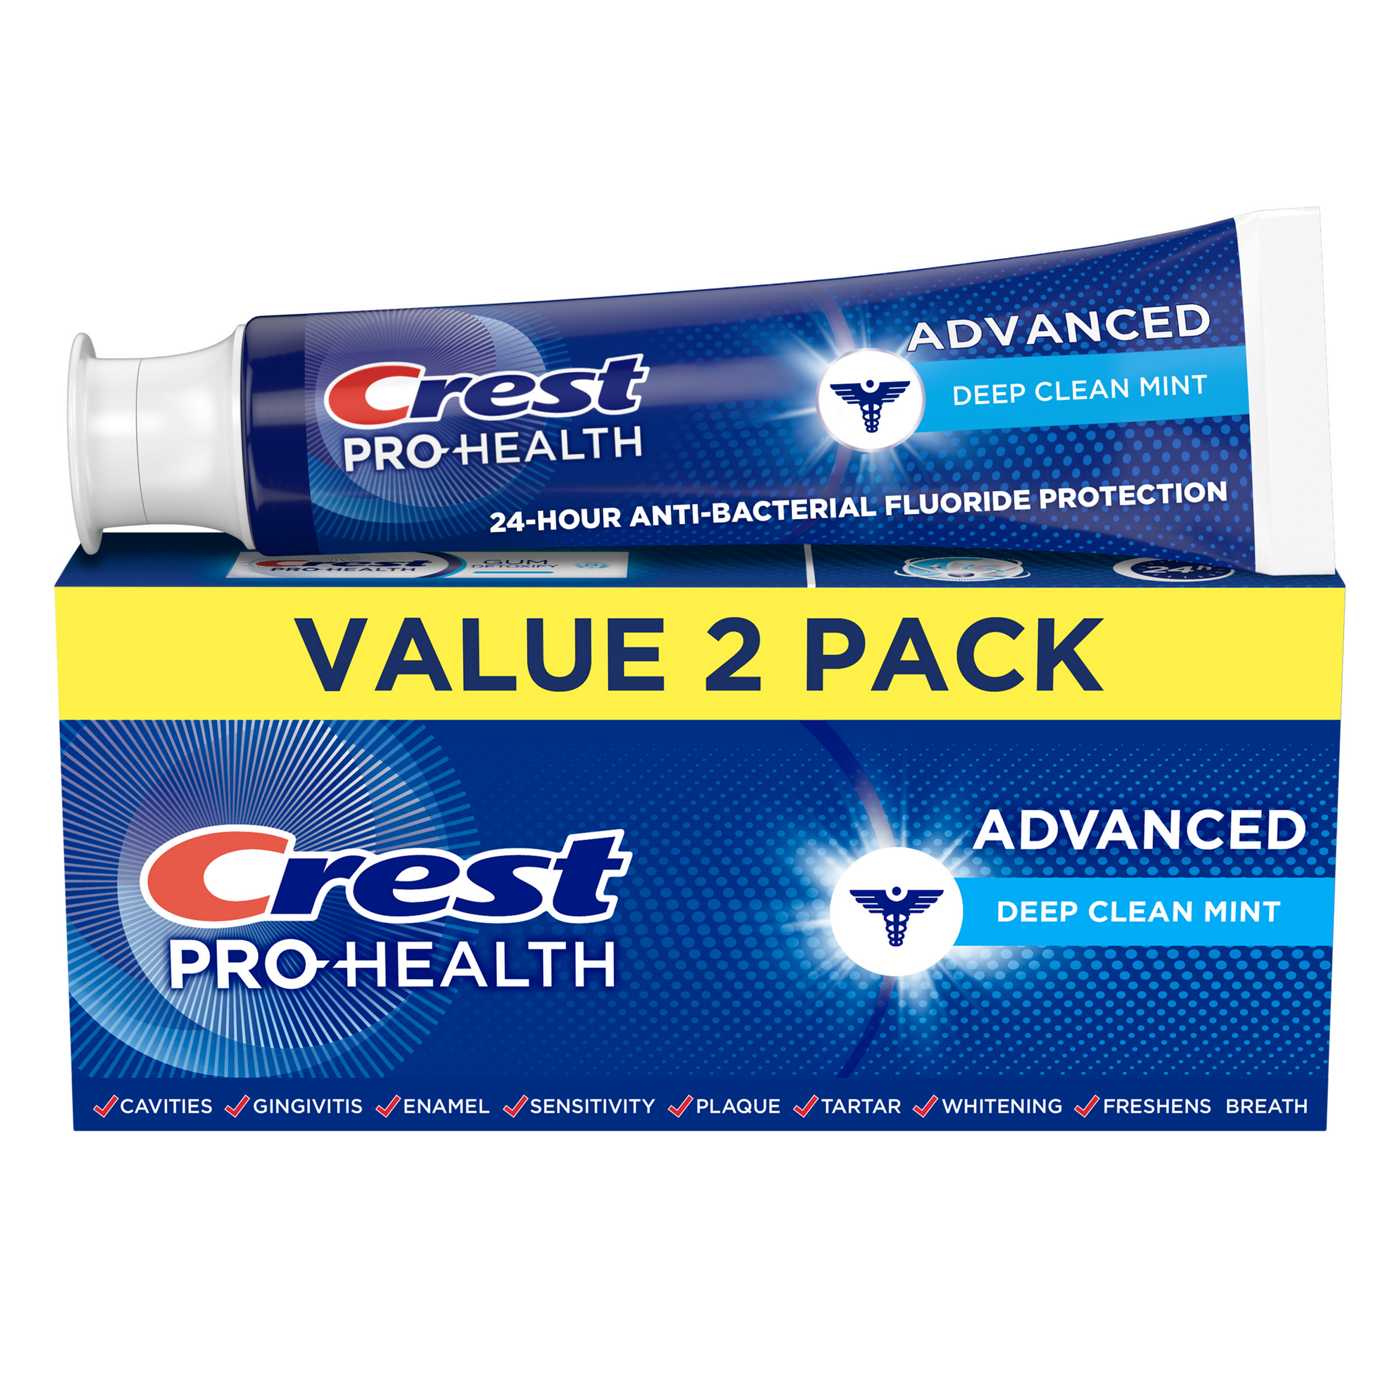 Crest Pro-Health Advanced Toothpaste - Deep Clean Mint, 2 Pk; image 6 of 6